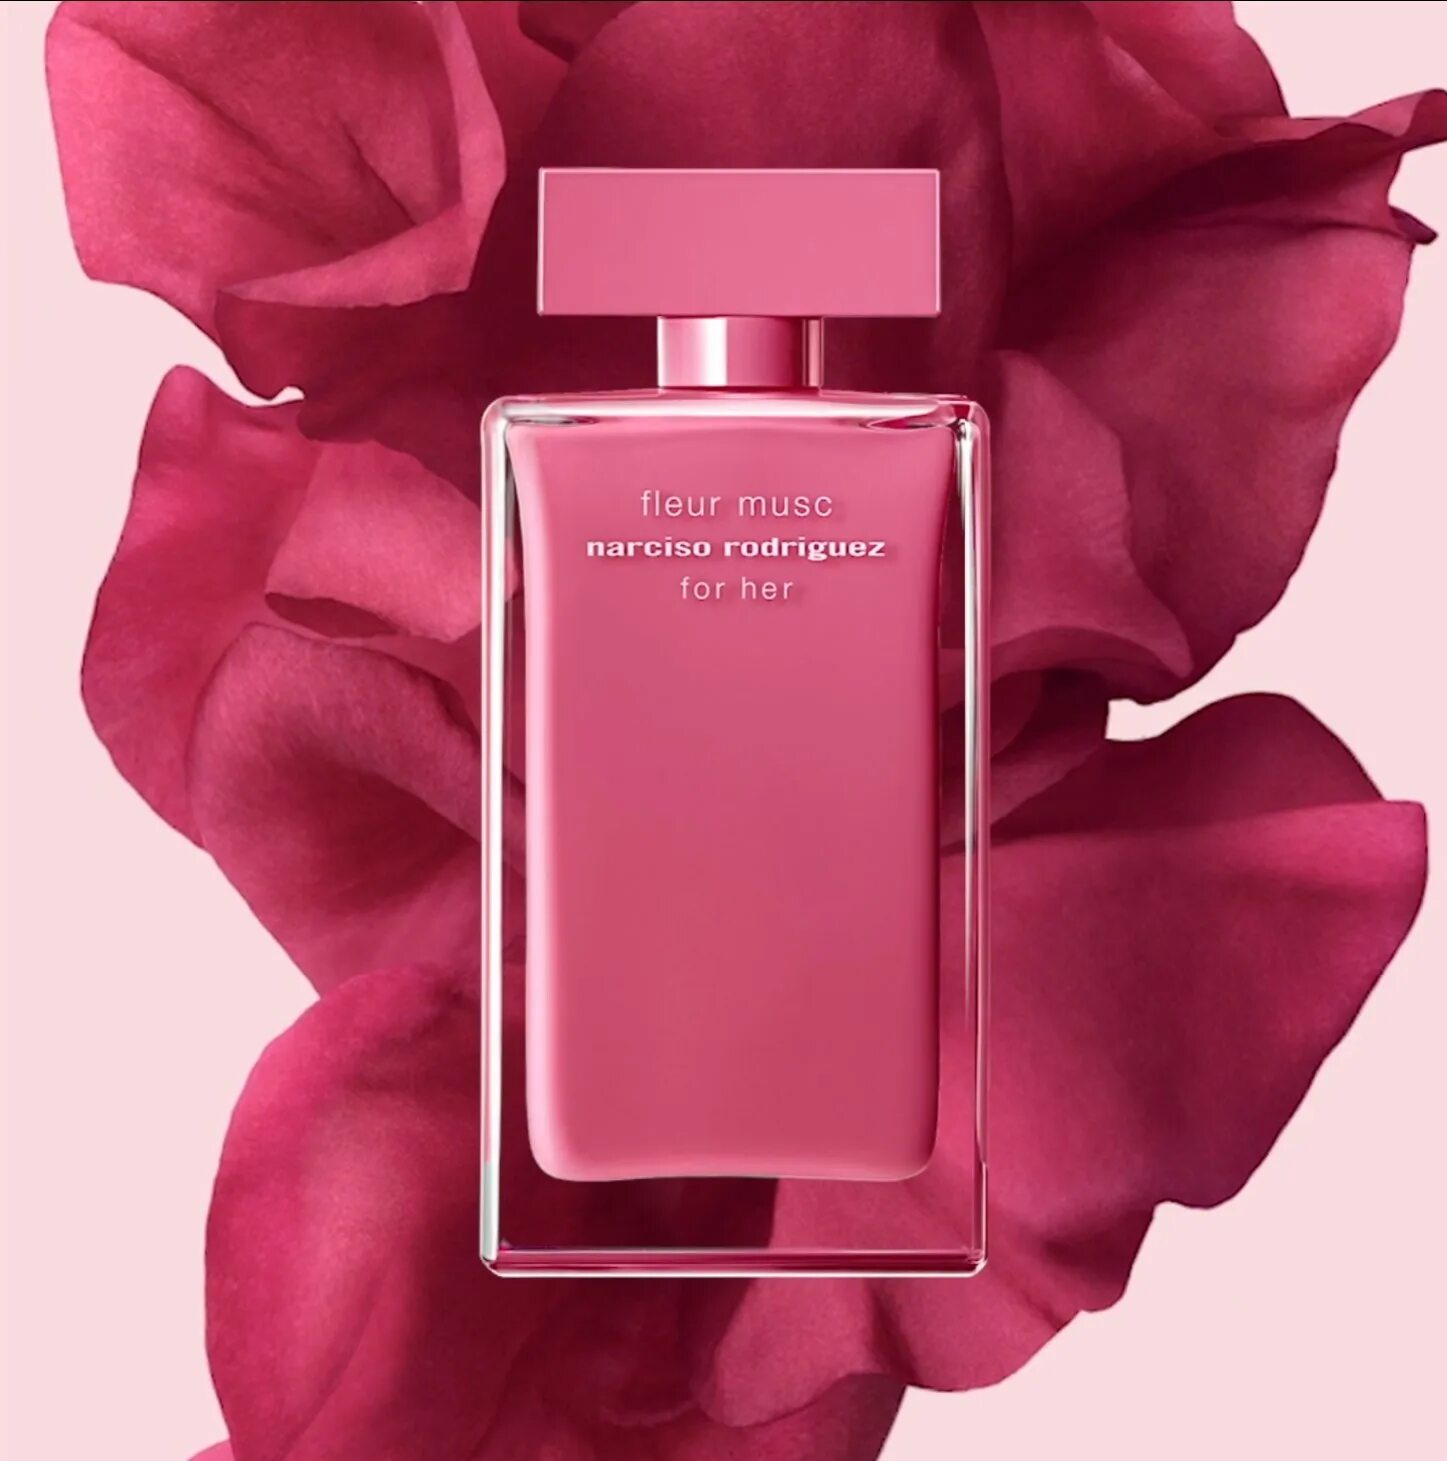 Narciso Rodriguez fleur Musc for her Parfum. Narciso Rodriguez Musc. Fleur Musc Narciso Rodriguez for her. Narciso Rodriguez fleur Musc for her EDT, 100 ml (Luxe евро). Флер муск